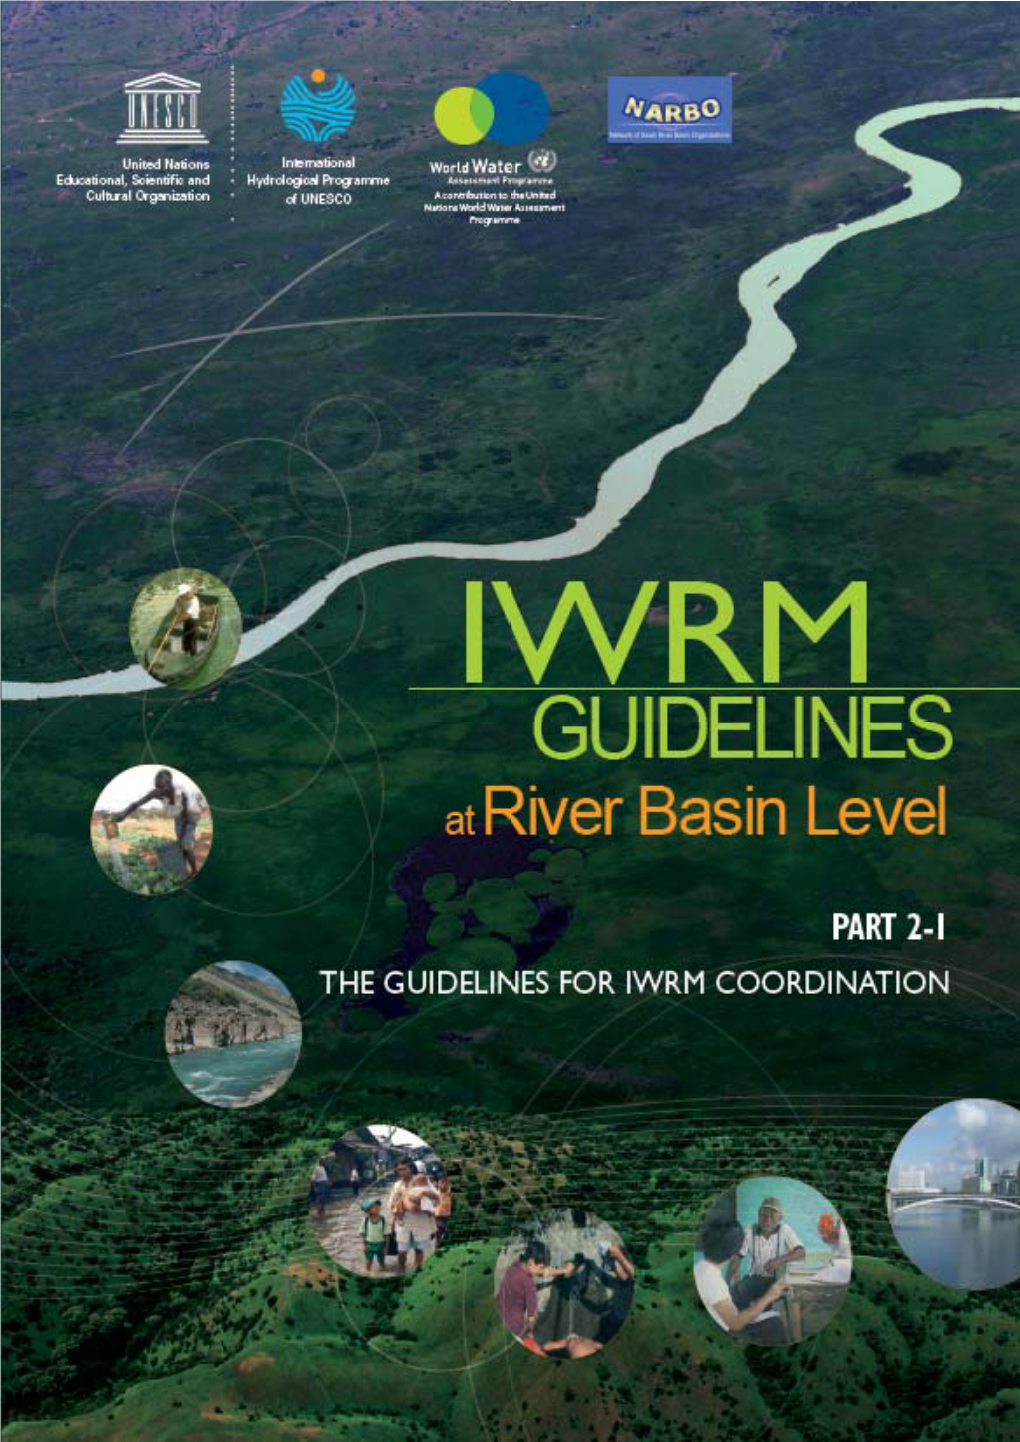 IWRM Guidelines at River Basin Level, Part